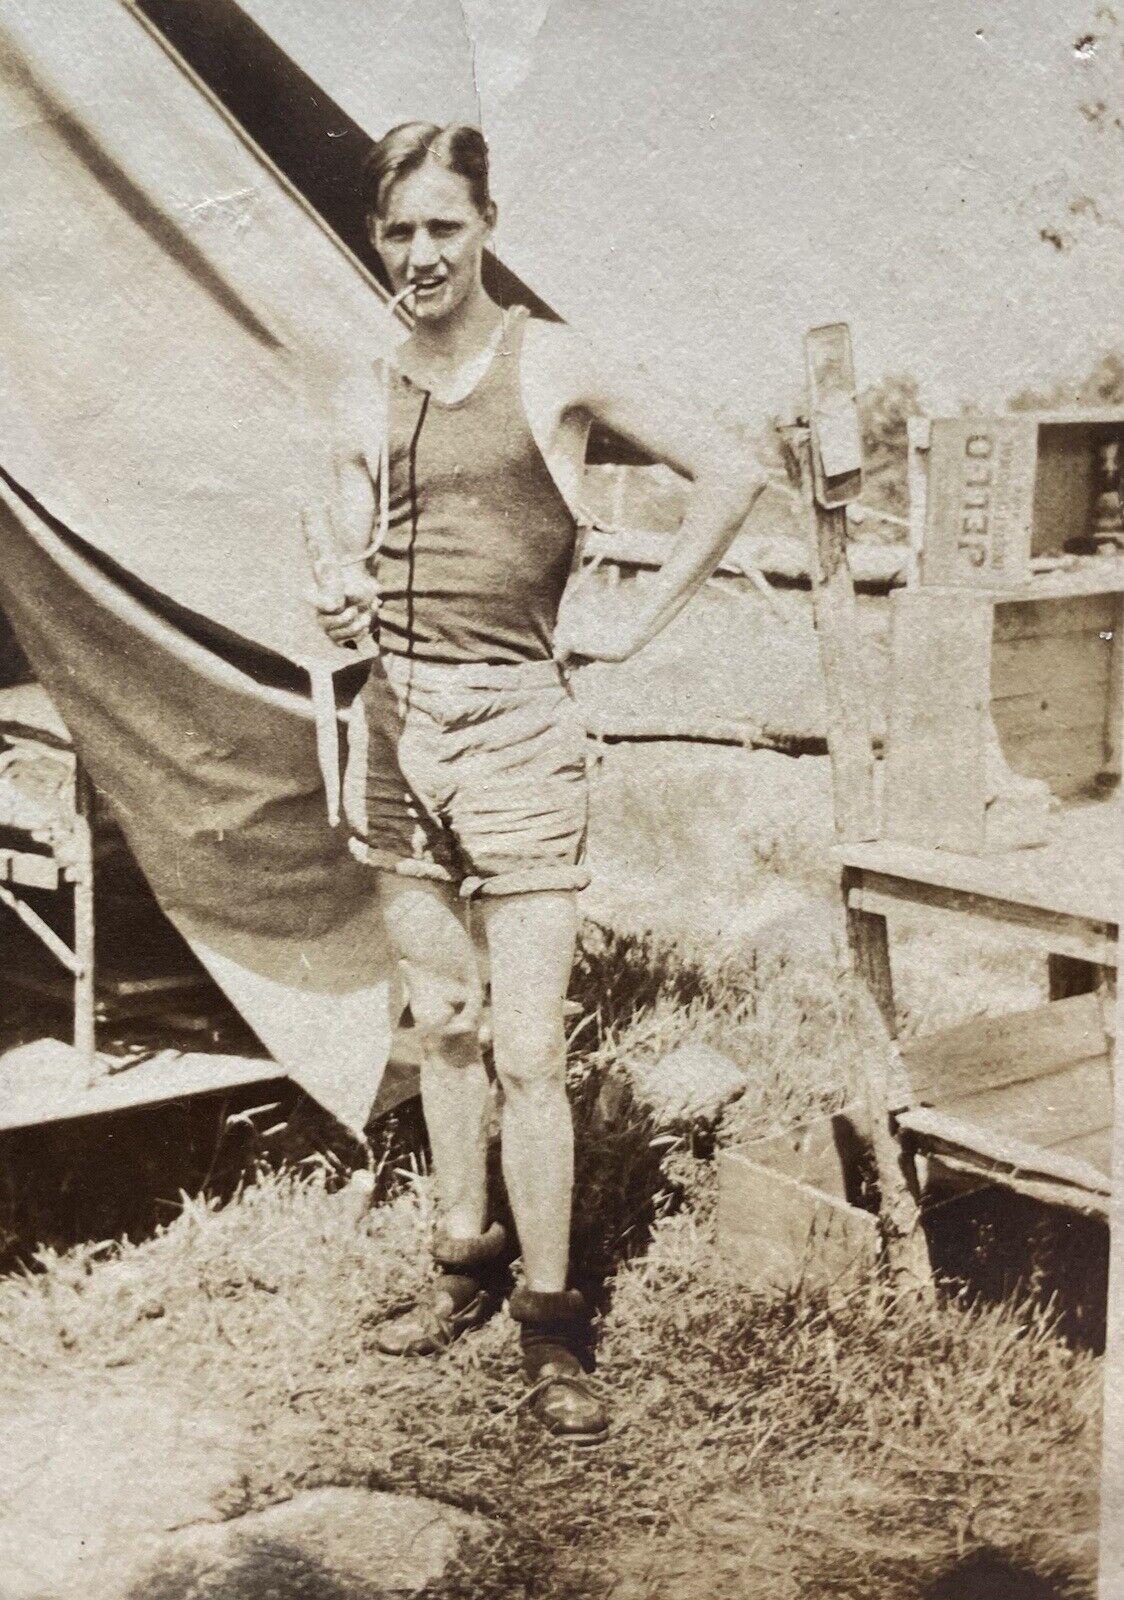 Boy Scouts Young Man Outside Tent Getting Ready for the Day Small Vintage Photo